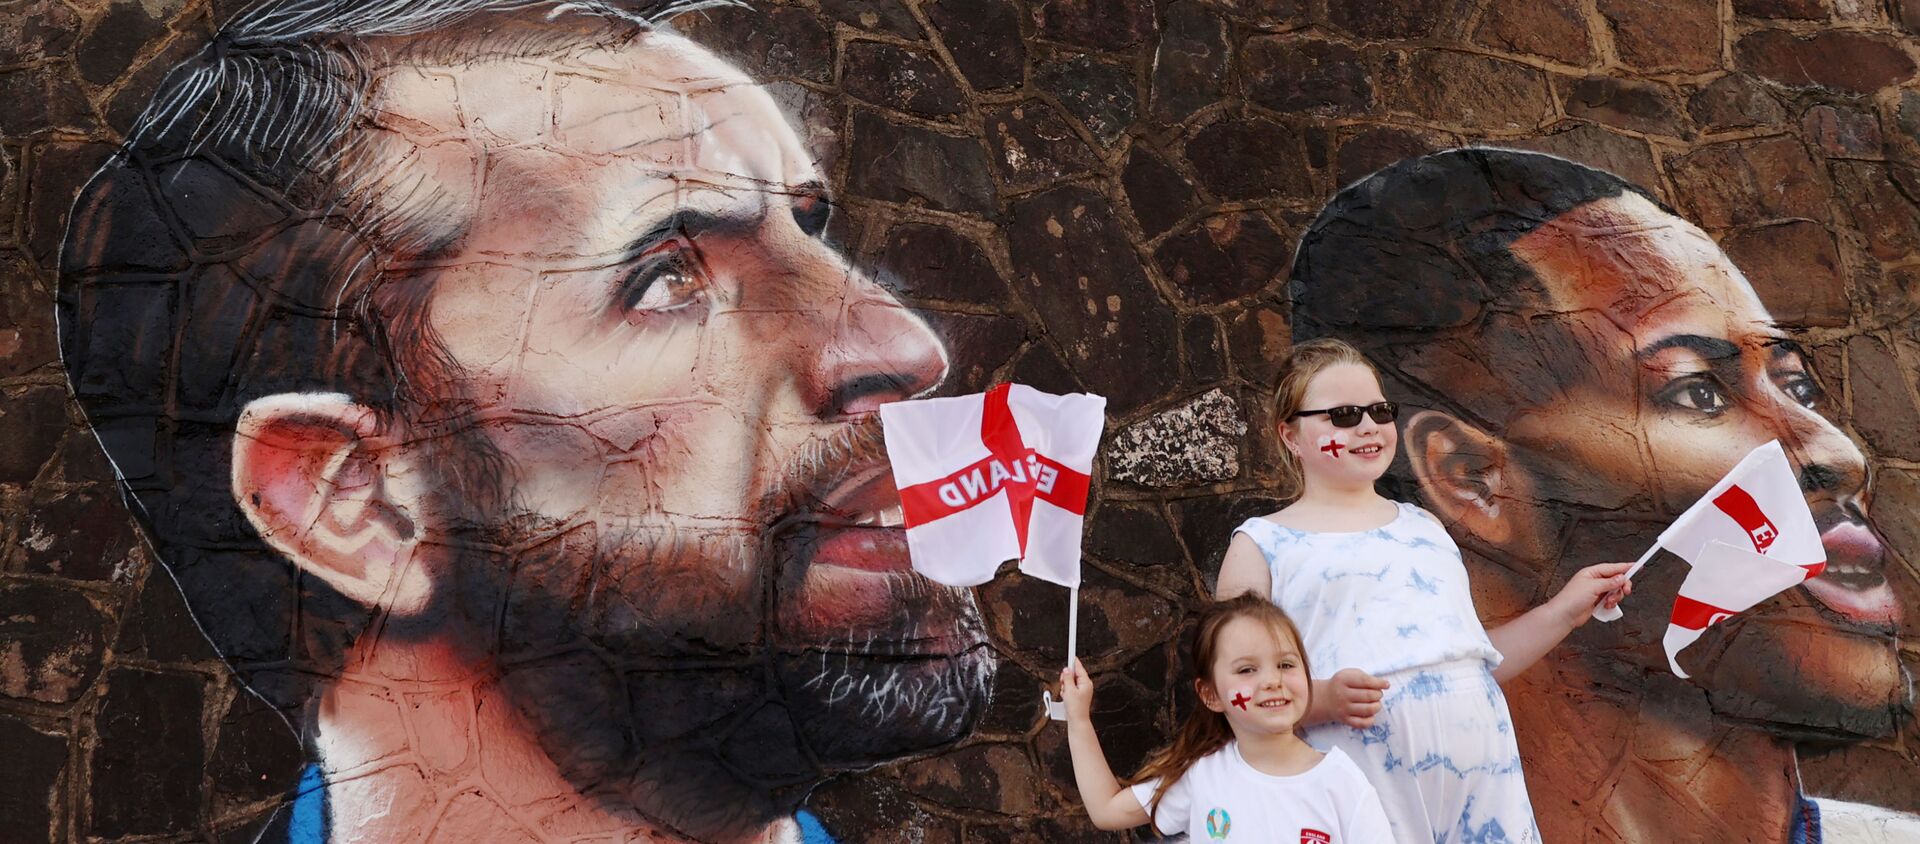 Soccer Football - England fans pose for a photograph in front of a giant mural created by street artist Nathan Parker of Gareth Southgate, Harry Kane and Raheem Sterling ahead of the Euro 2020 final against Italy - Bullring, Nuneaton, Britain - July 10, 2021 - Sputnik International, 1920, 12.07.2021